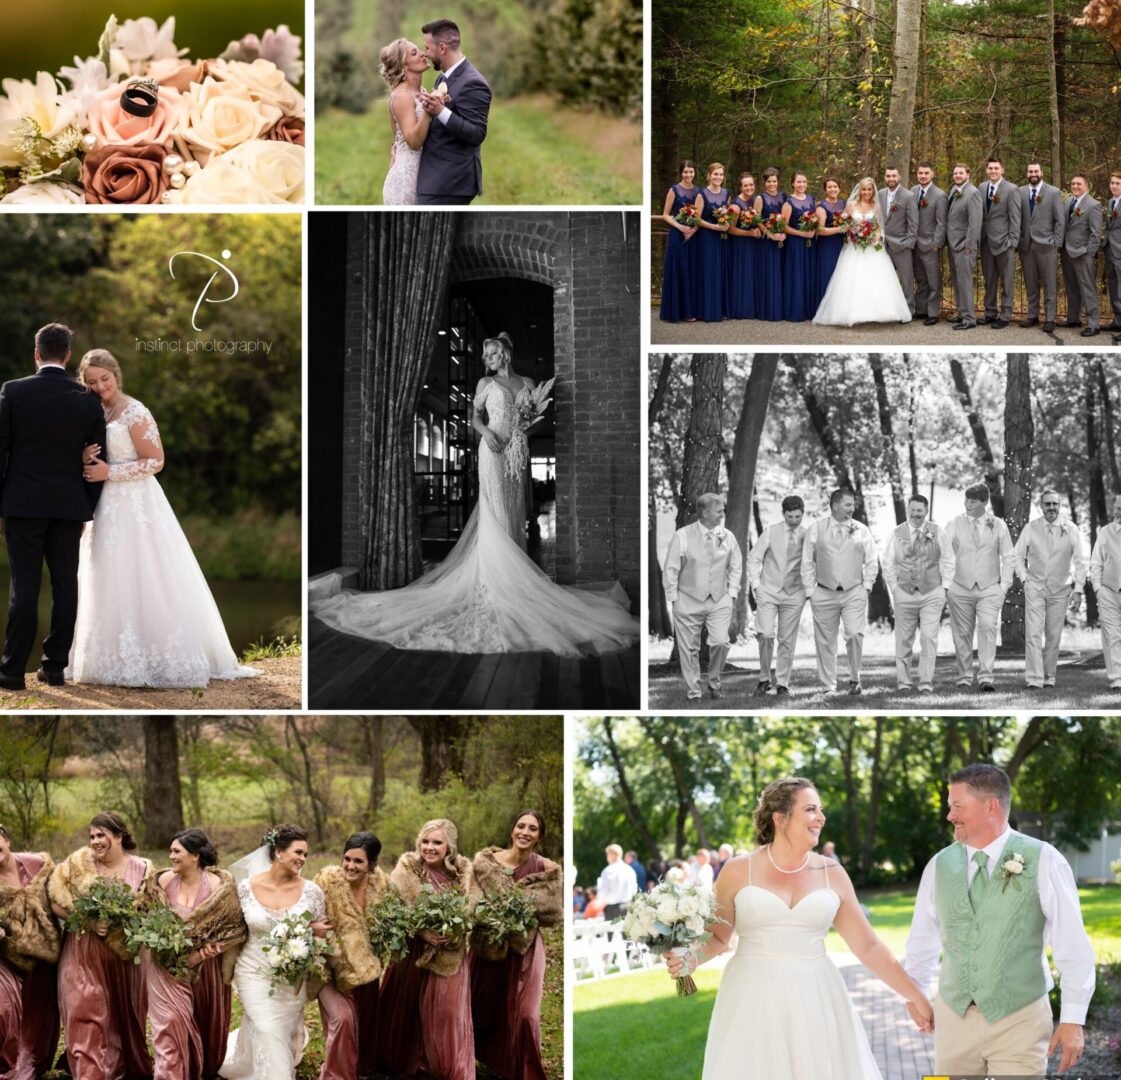 A collage of wedding photos with the bride and groom.